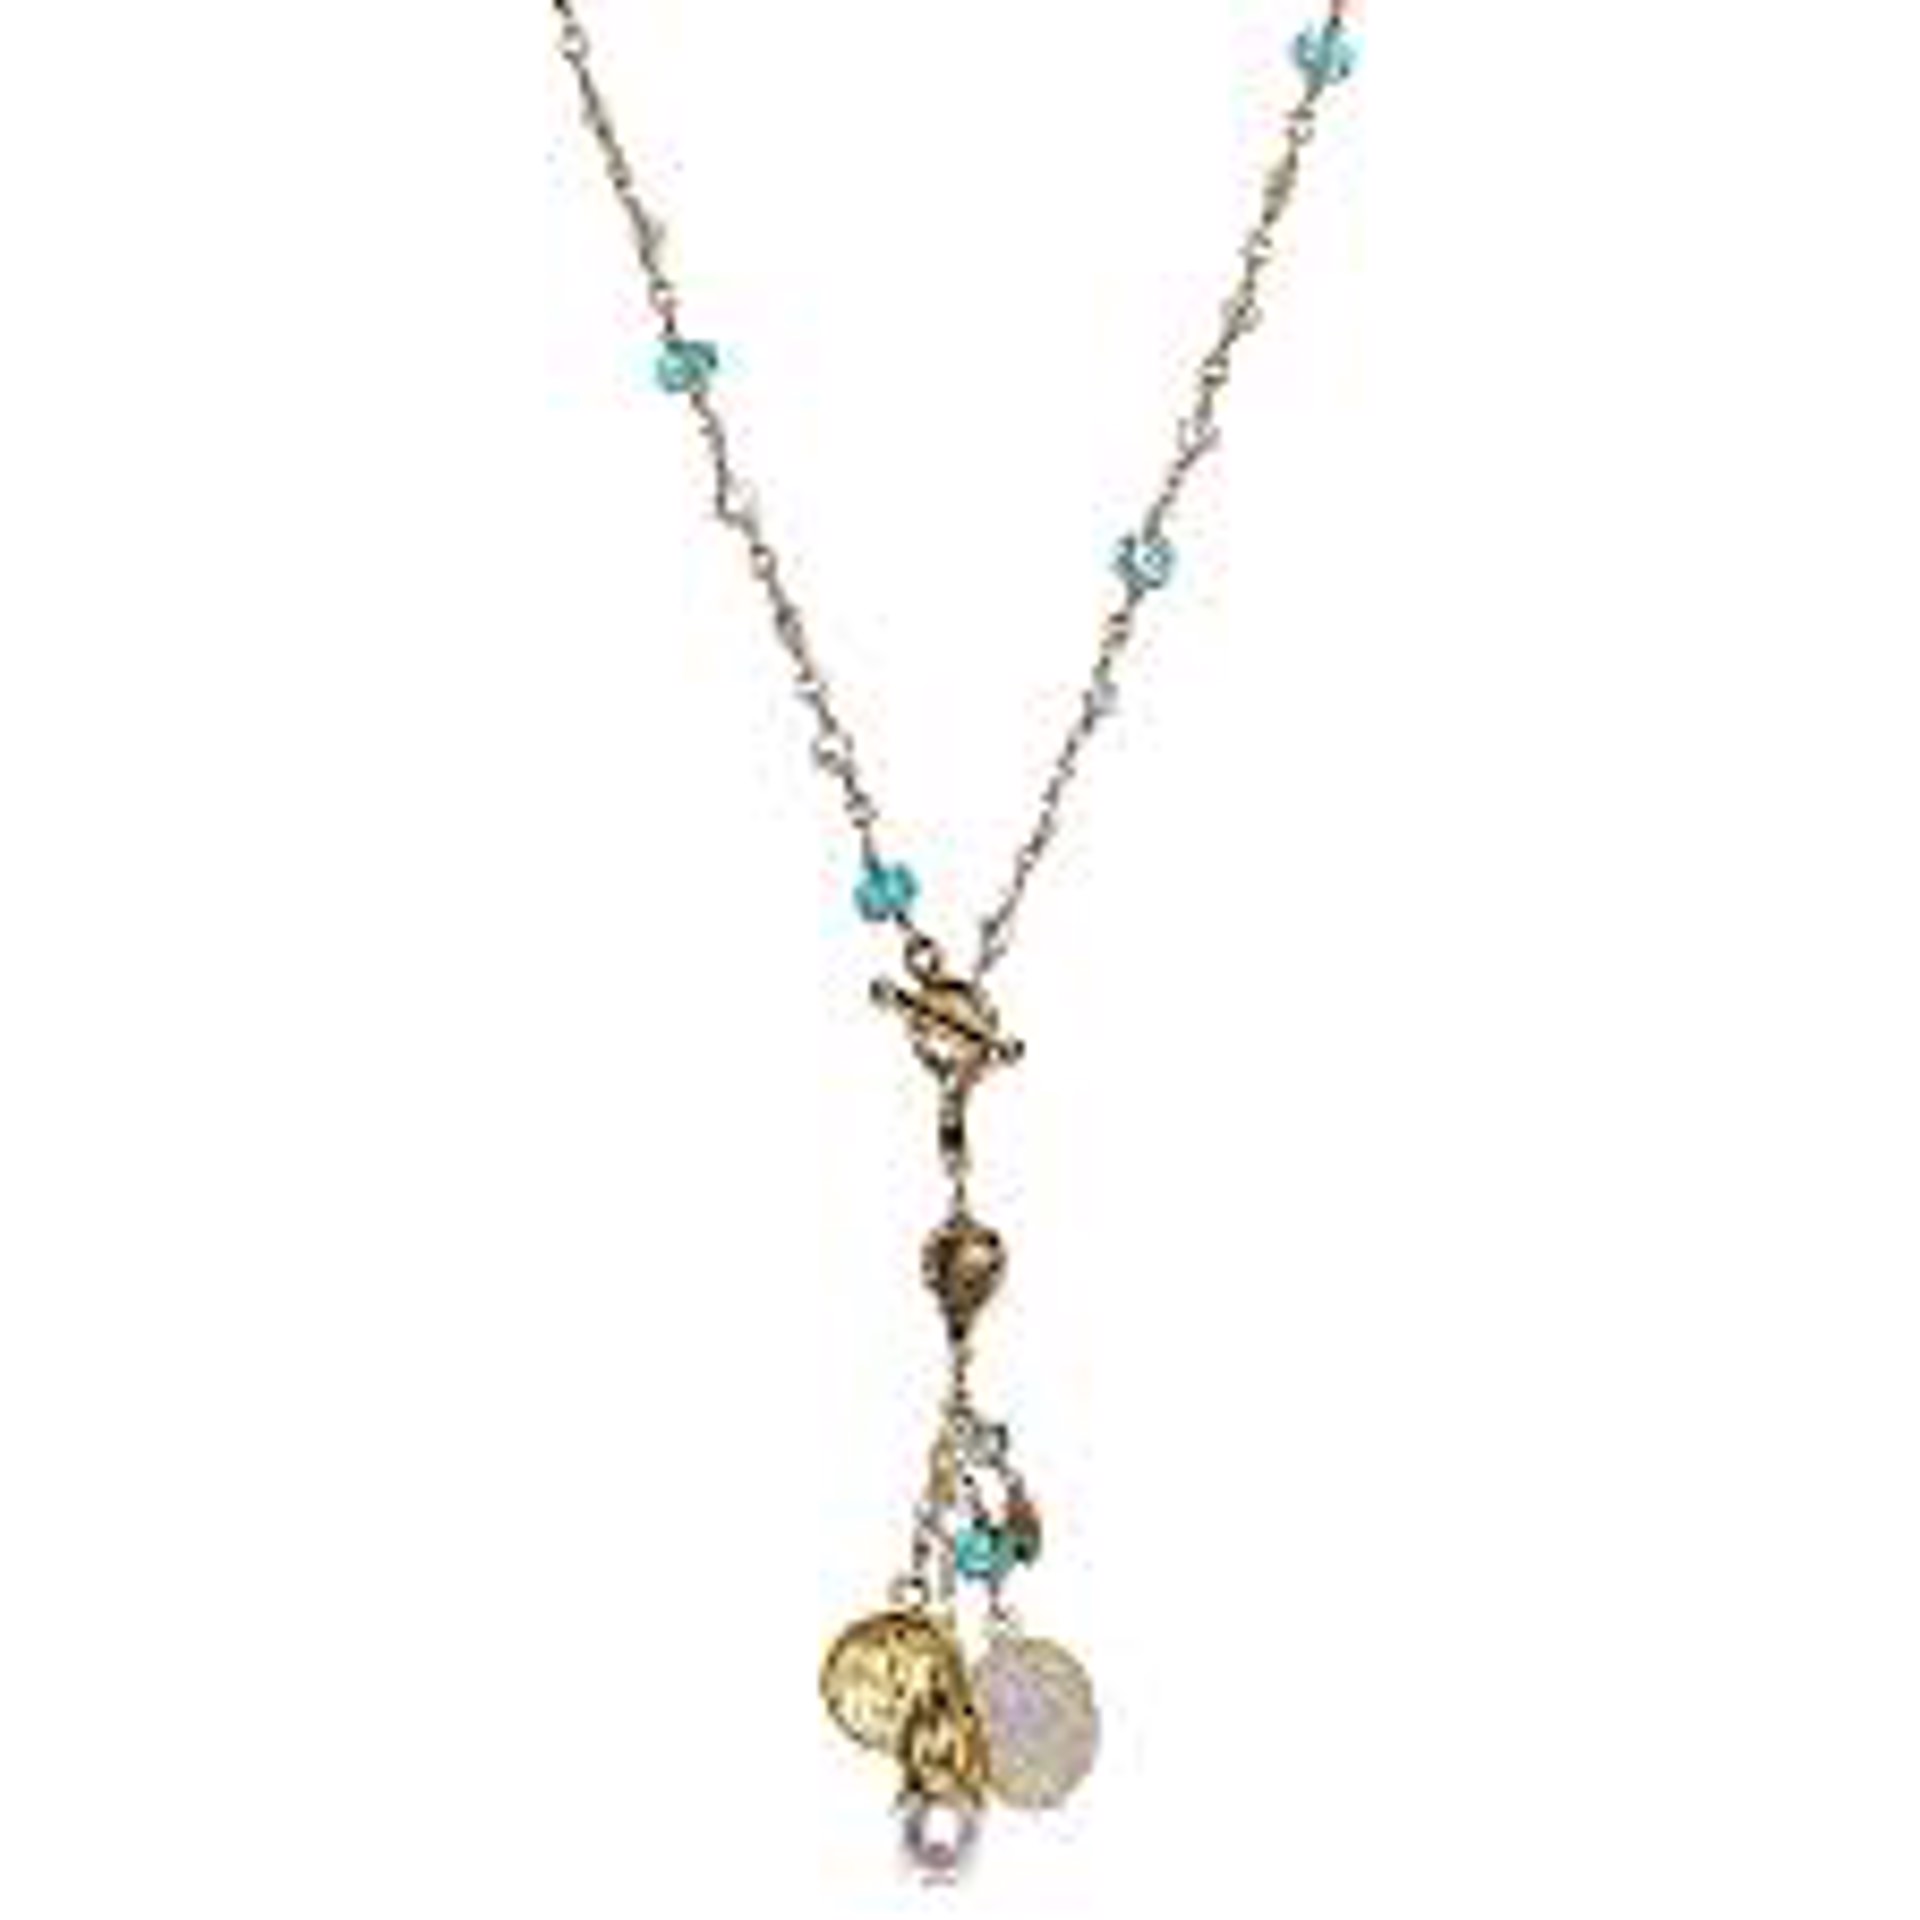 Long Lariat Necklace in pearls and blue topaz by Melinda Lawton Jewelry